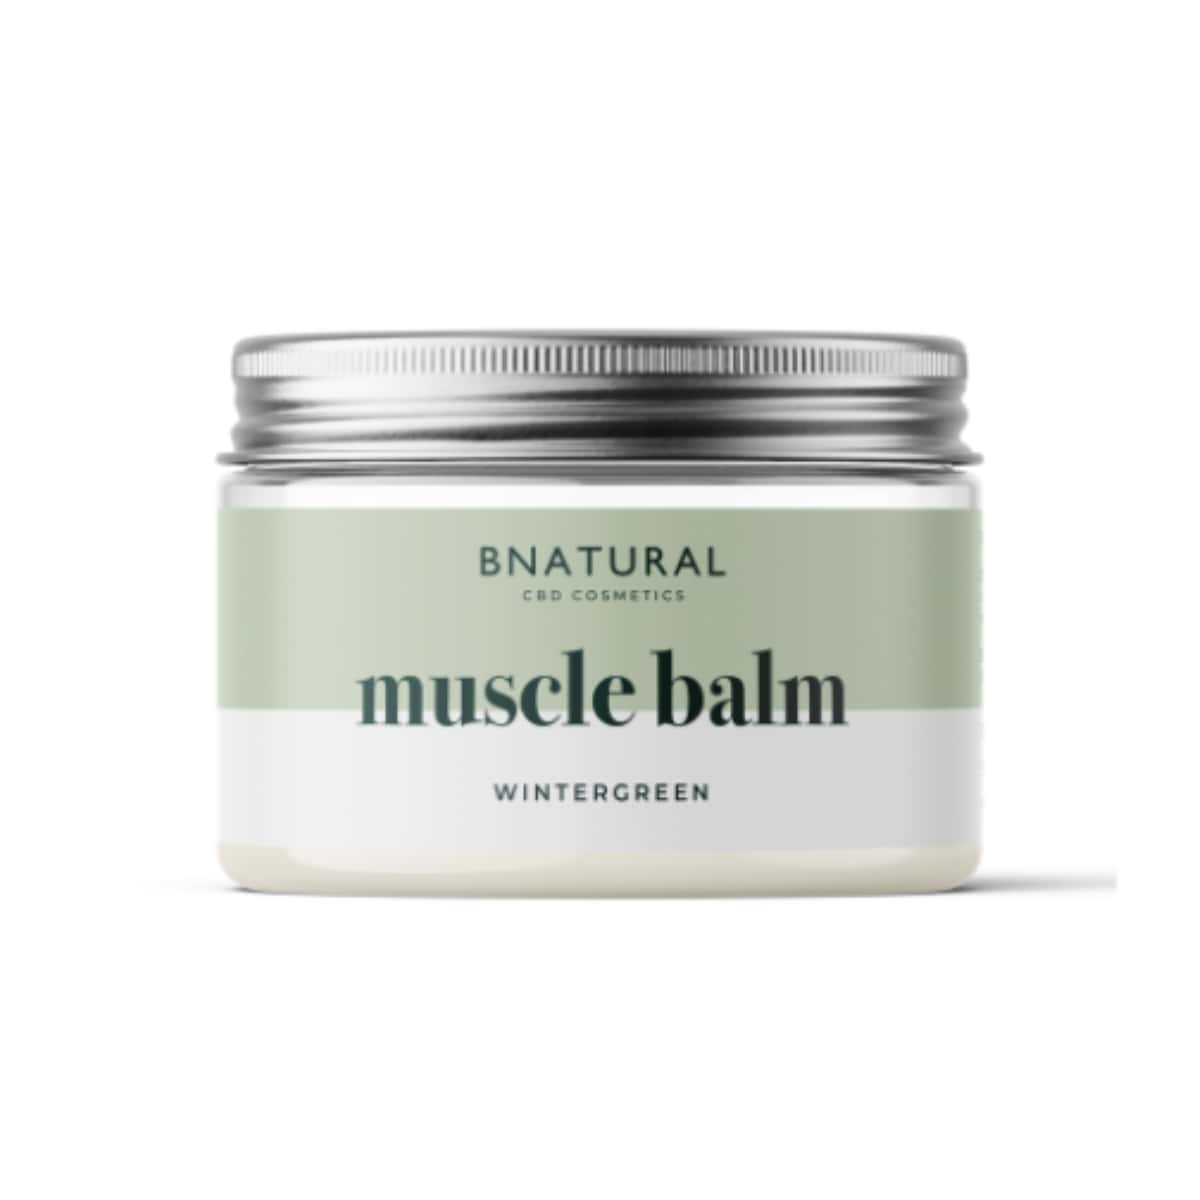 50ml glass jar of BNatural CBD Wintergreen Muscle Balm against a white background